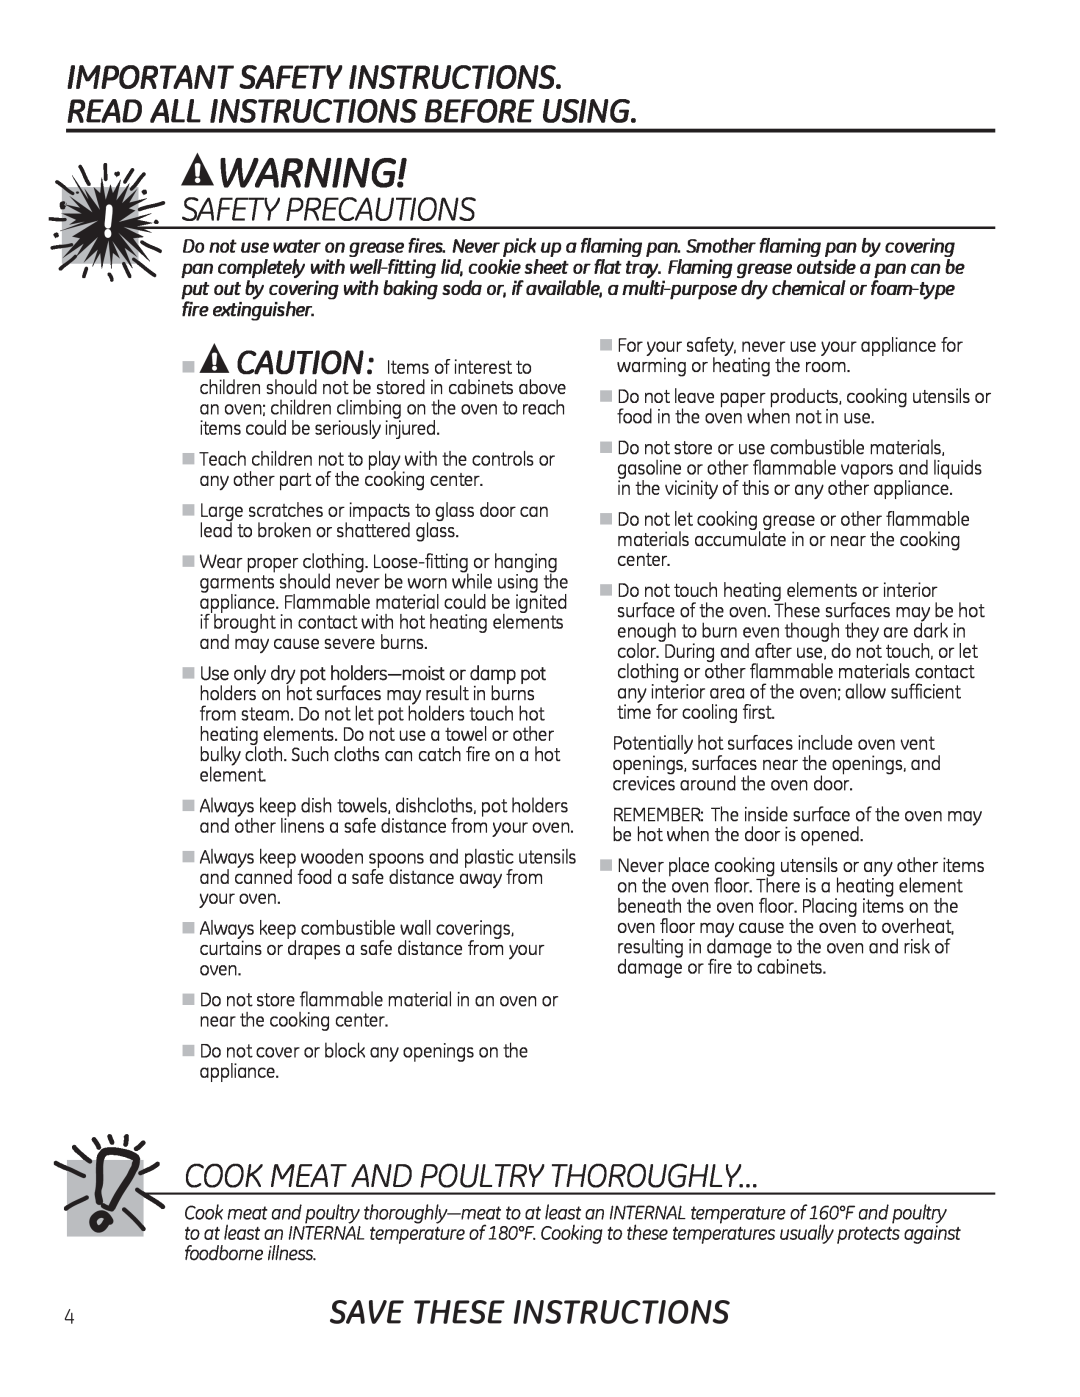 GE JKP90, JTP90 Cook Meat And Poultry Thoroughly…, IrrgeruqhLooqhvv, Important Safety Instructions, Safety Precautions 